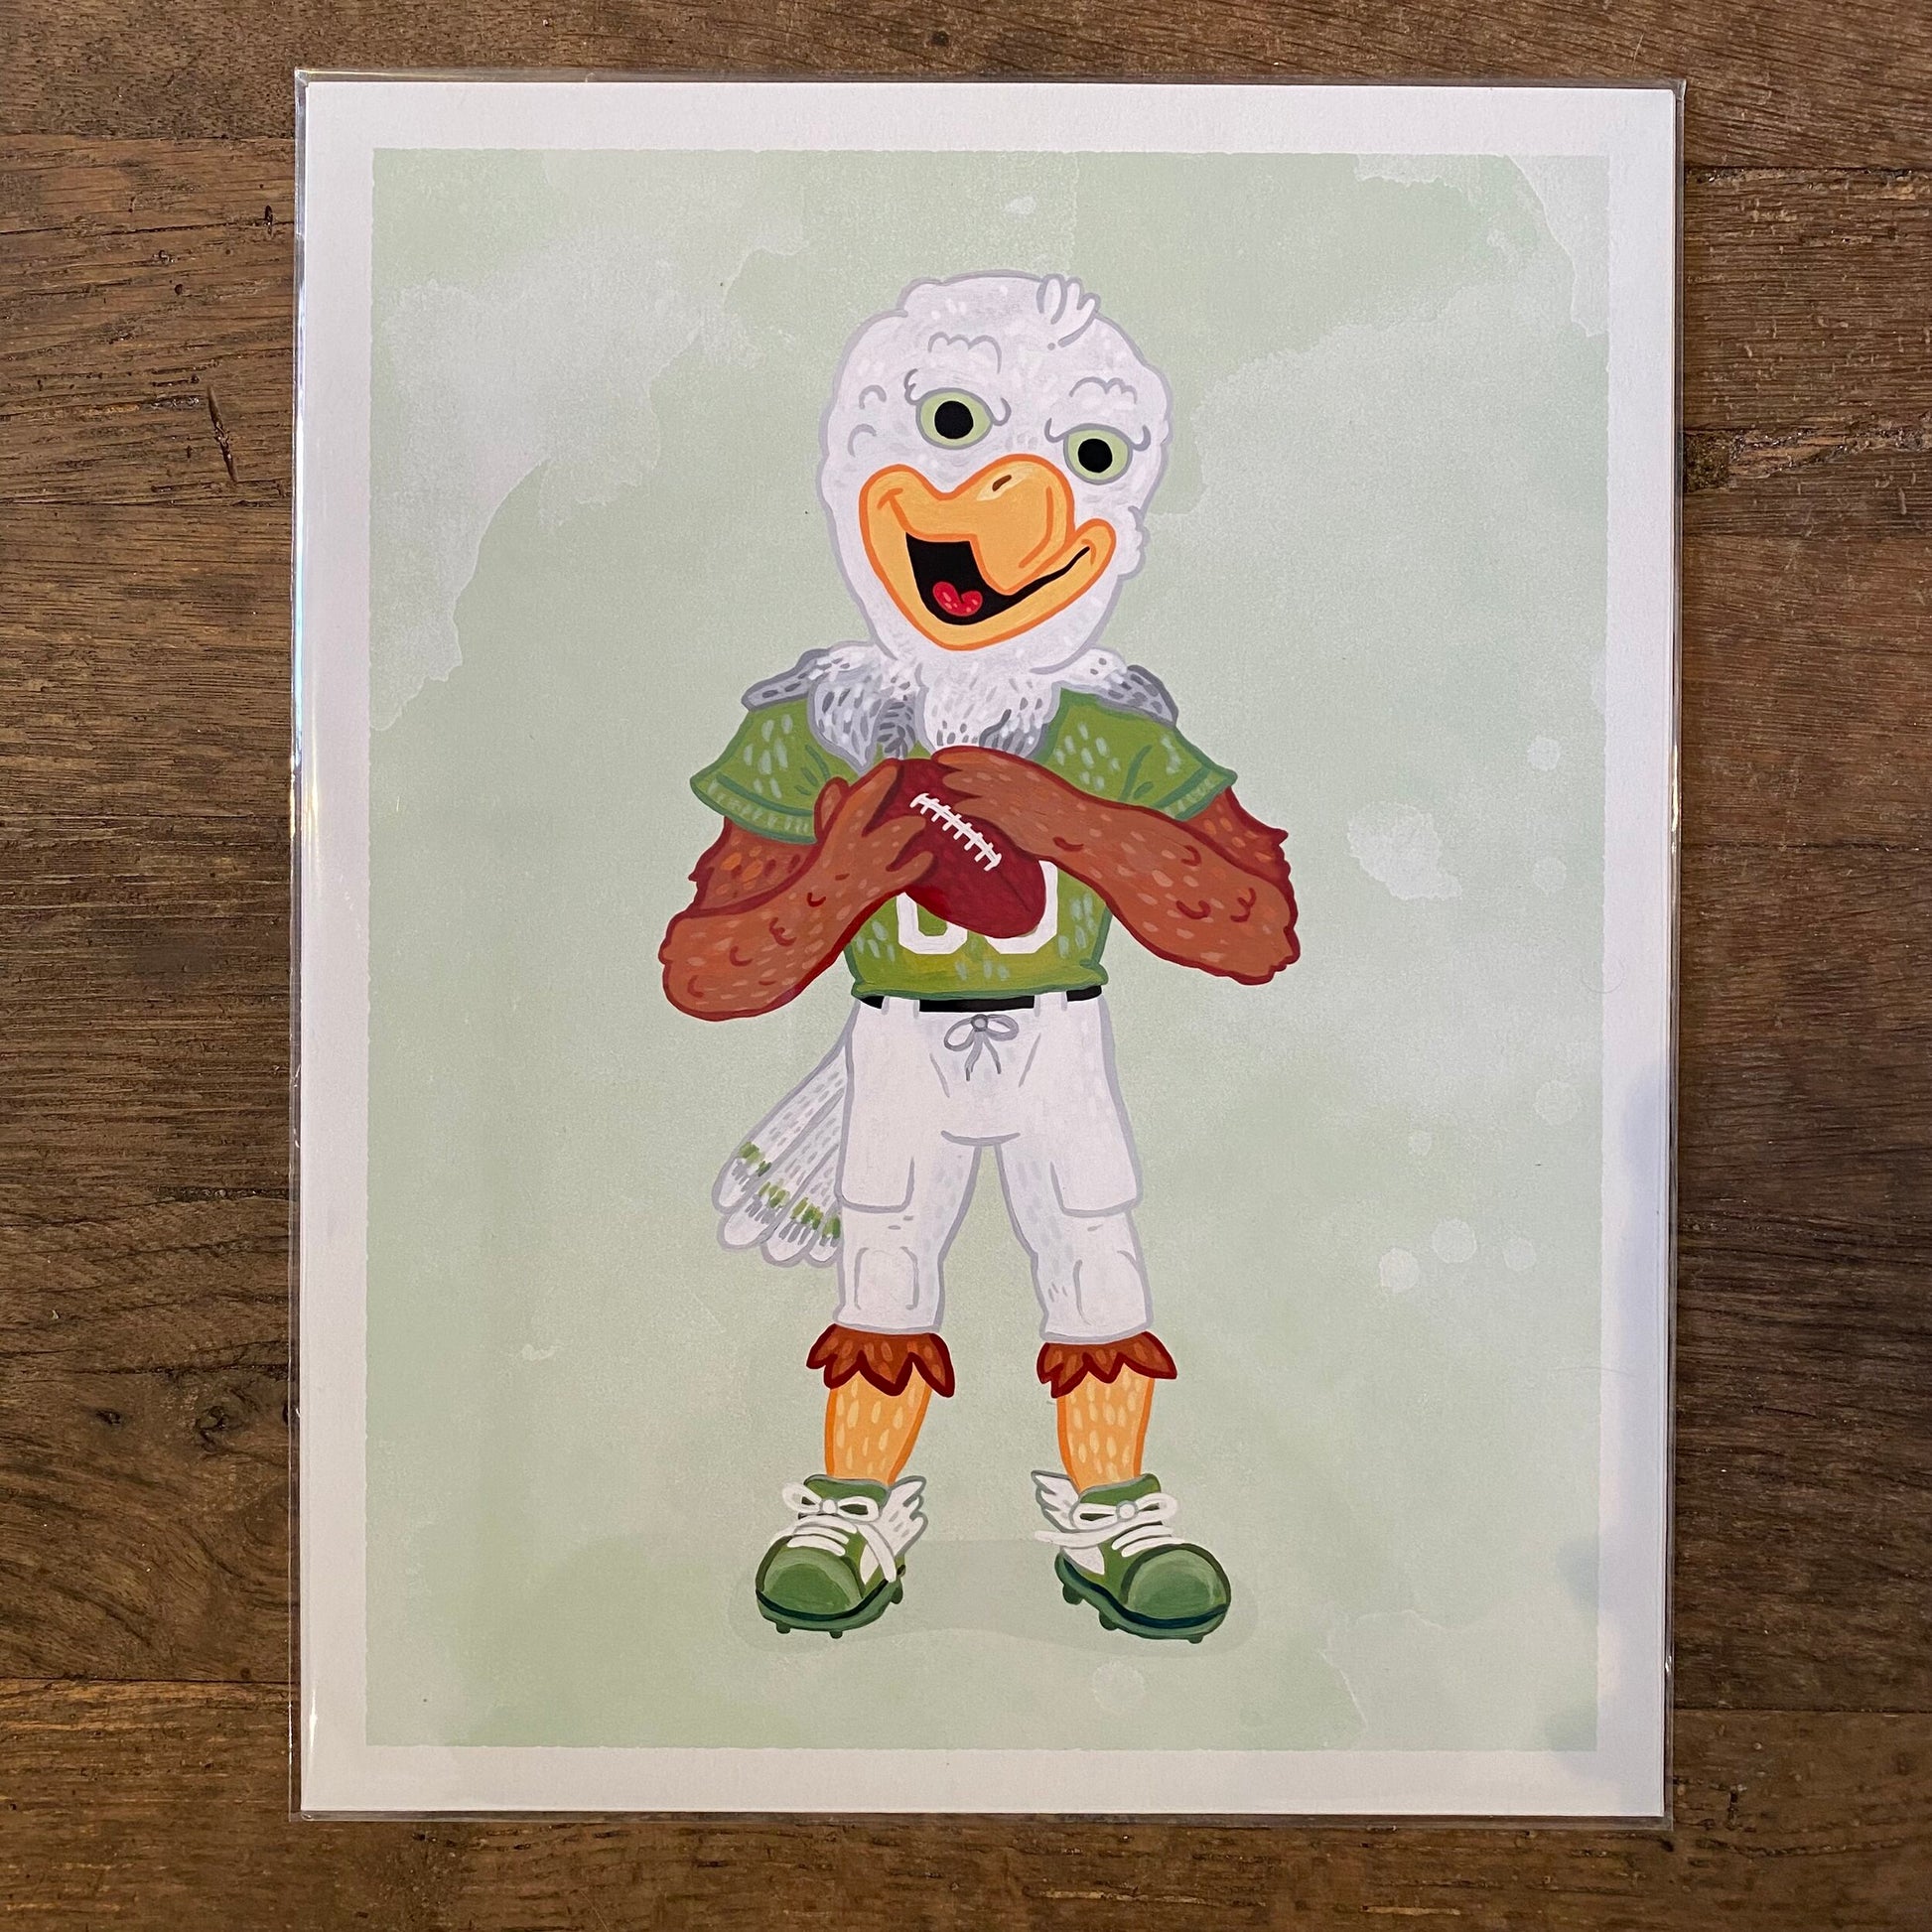 Illustration of an anthropomorphic duck dressed in football attire, holding a football, reminiscent of Philly Mascot Prints by Jamie Bendas gritty essence.